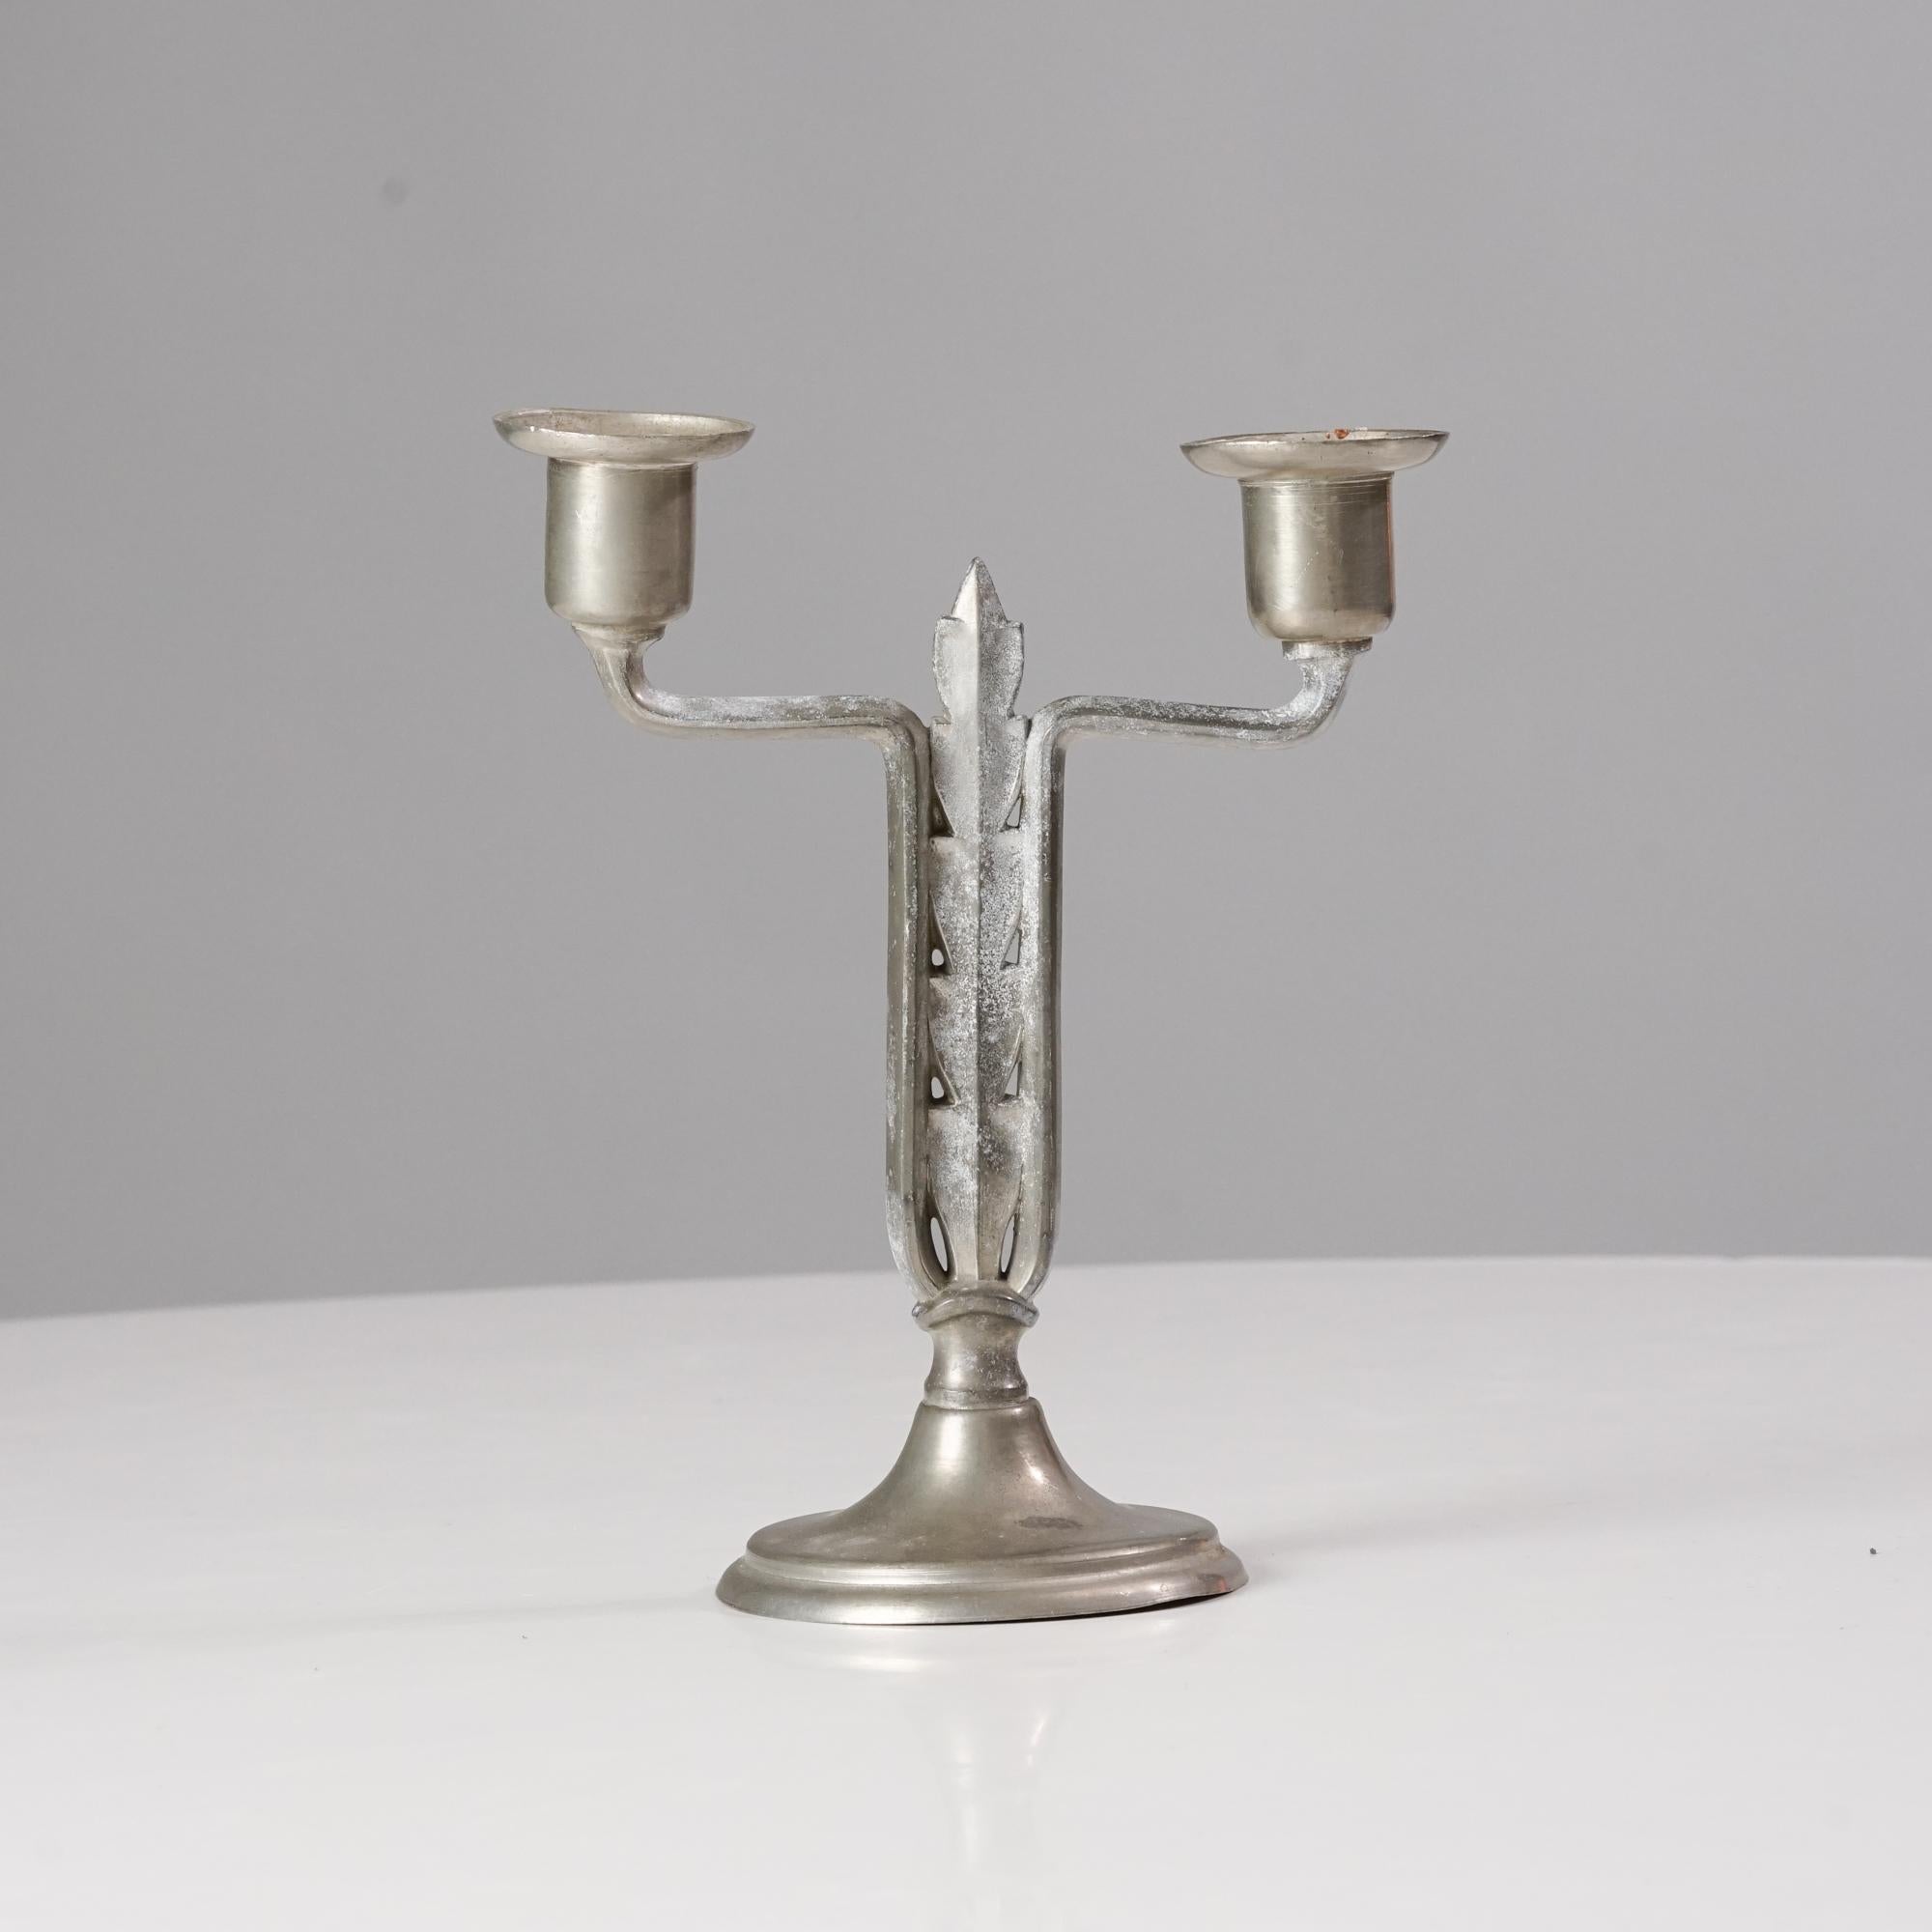 Candlestick by Paavo Tynell for Taito Oy from the 1920/1930s. Tin. Marked on the bottom. Good vintage condition, patina consistent with age and use. 